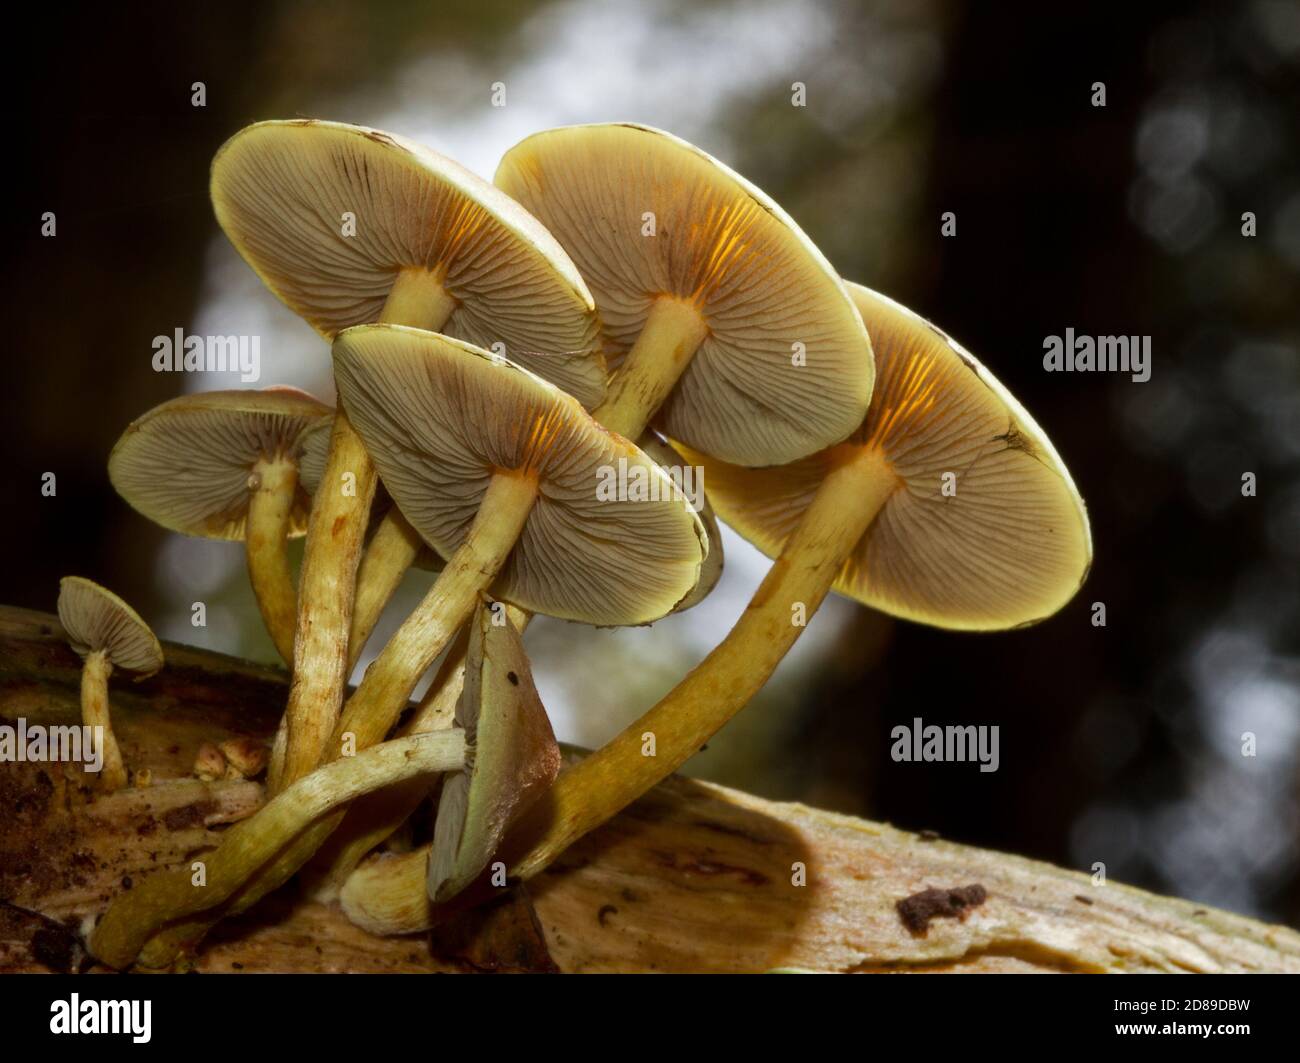 Clump of Sulphur Tuft mushrooms growing on the rotting branch of a tree Stock Photo